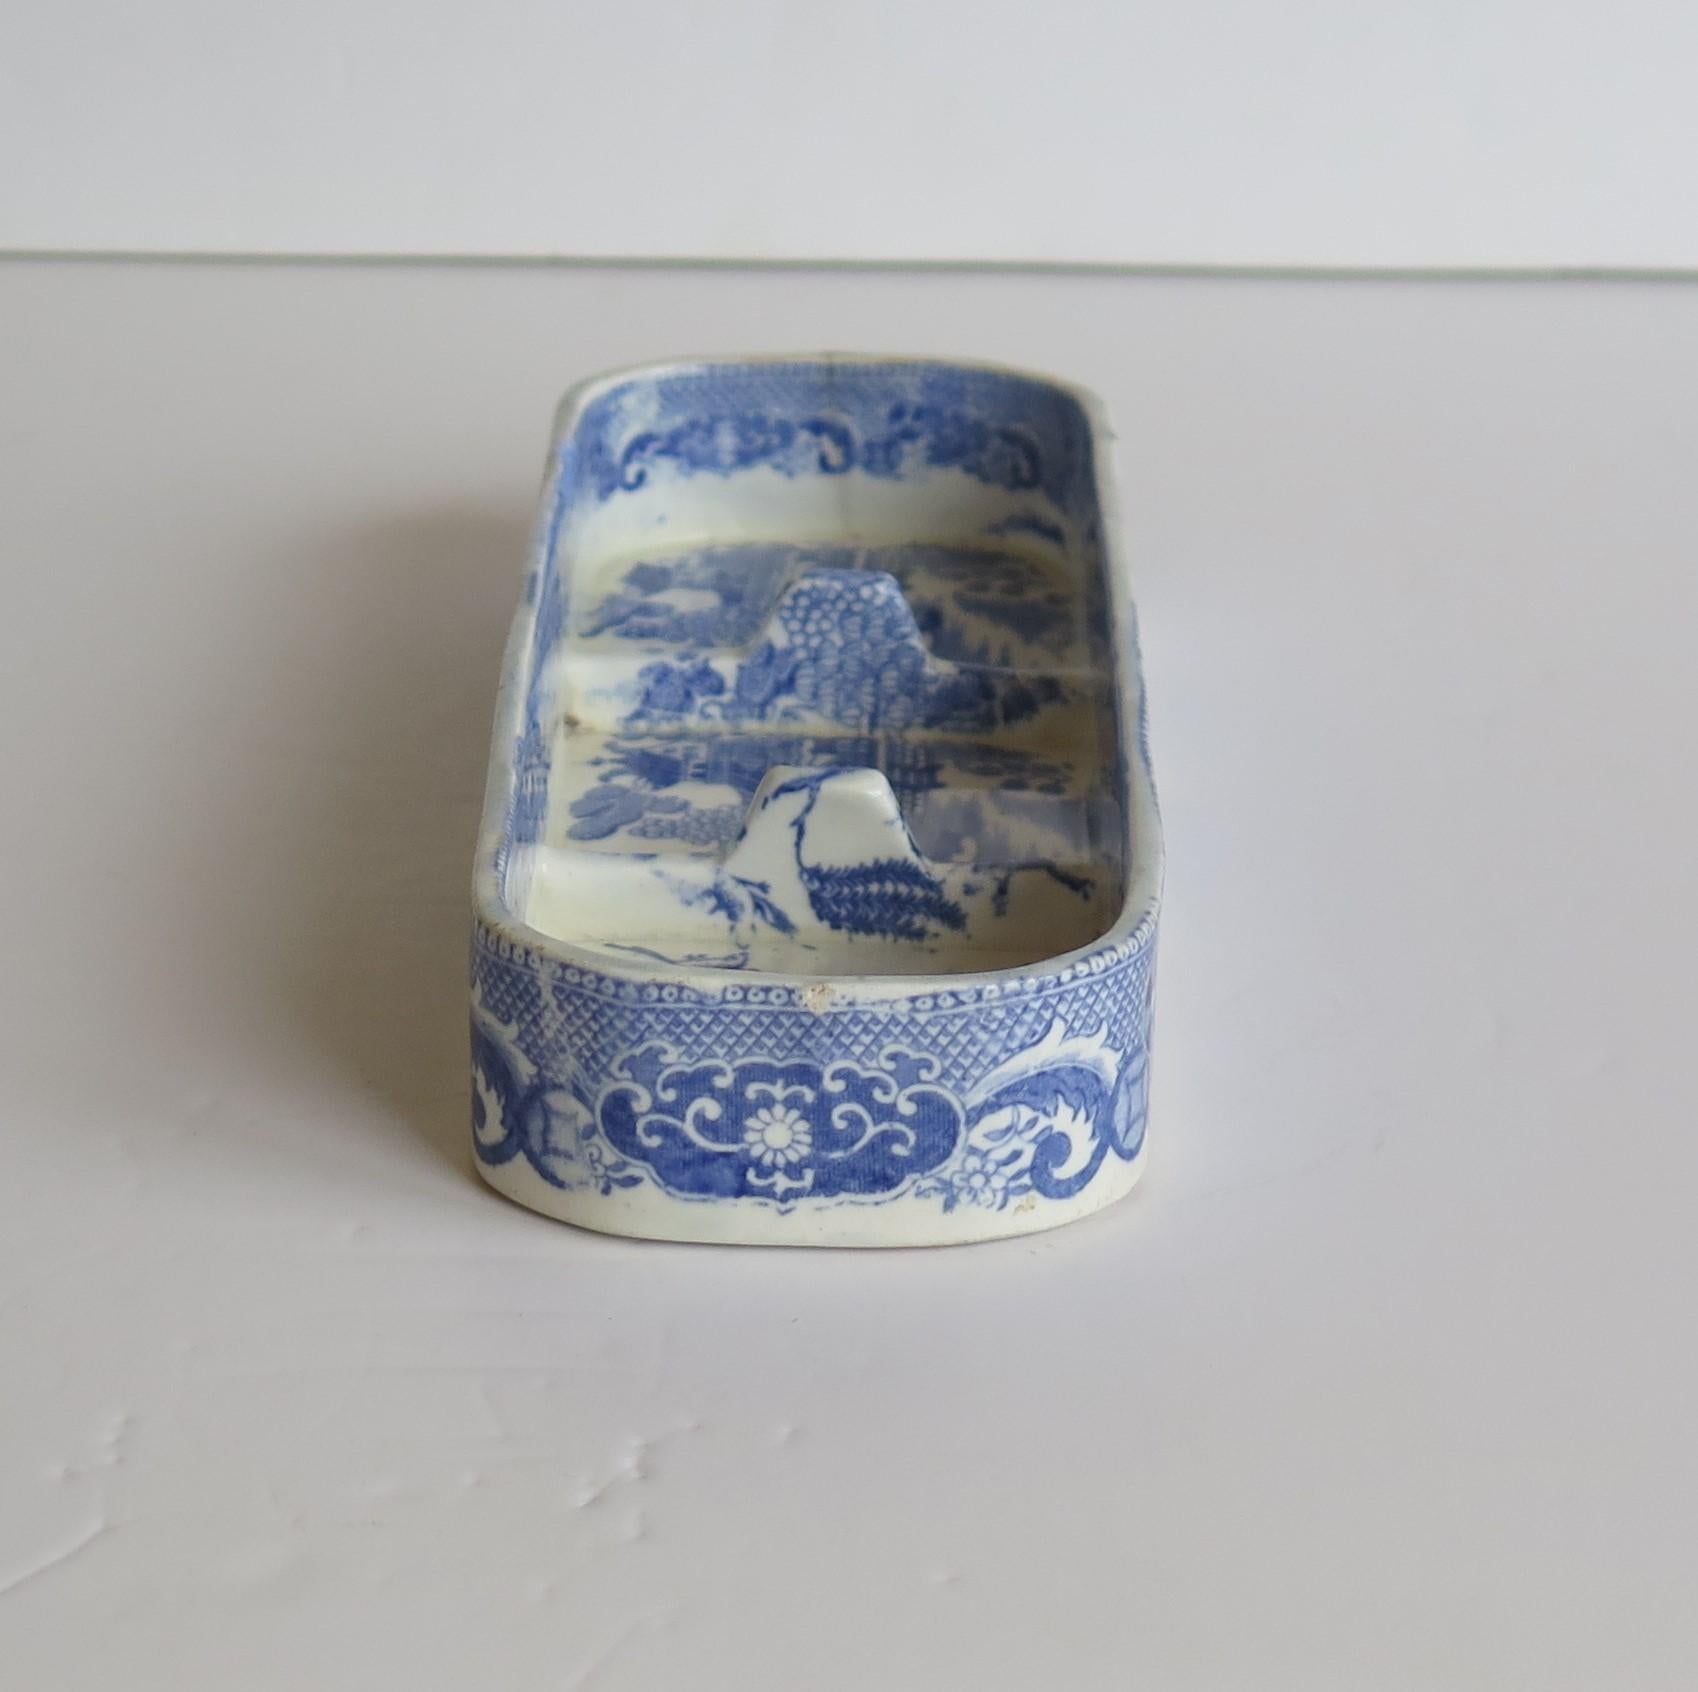 Rare Early Spode Pen Tray Pearlware Blue and White Willow Pattern, circa 1800 6